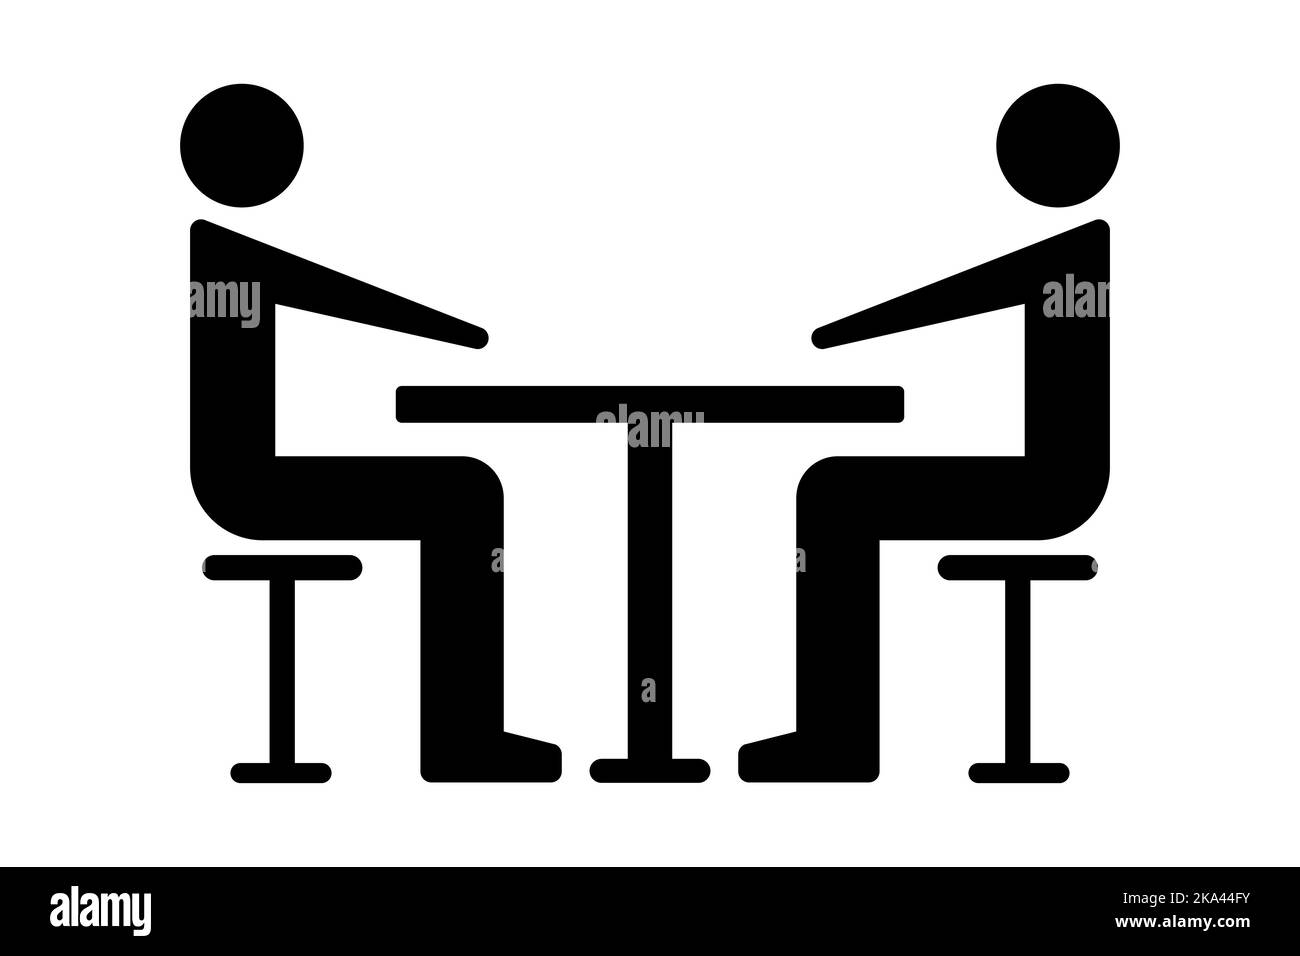 Two people sitting at a table icon. Team, partners, dealing, eating. Vector illustration Stock Vector